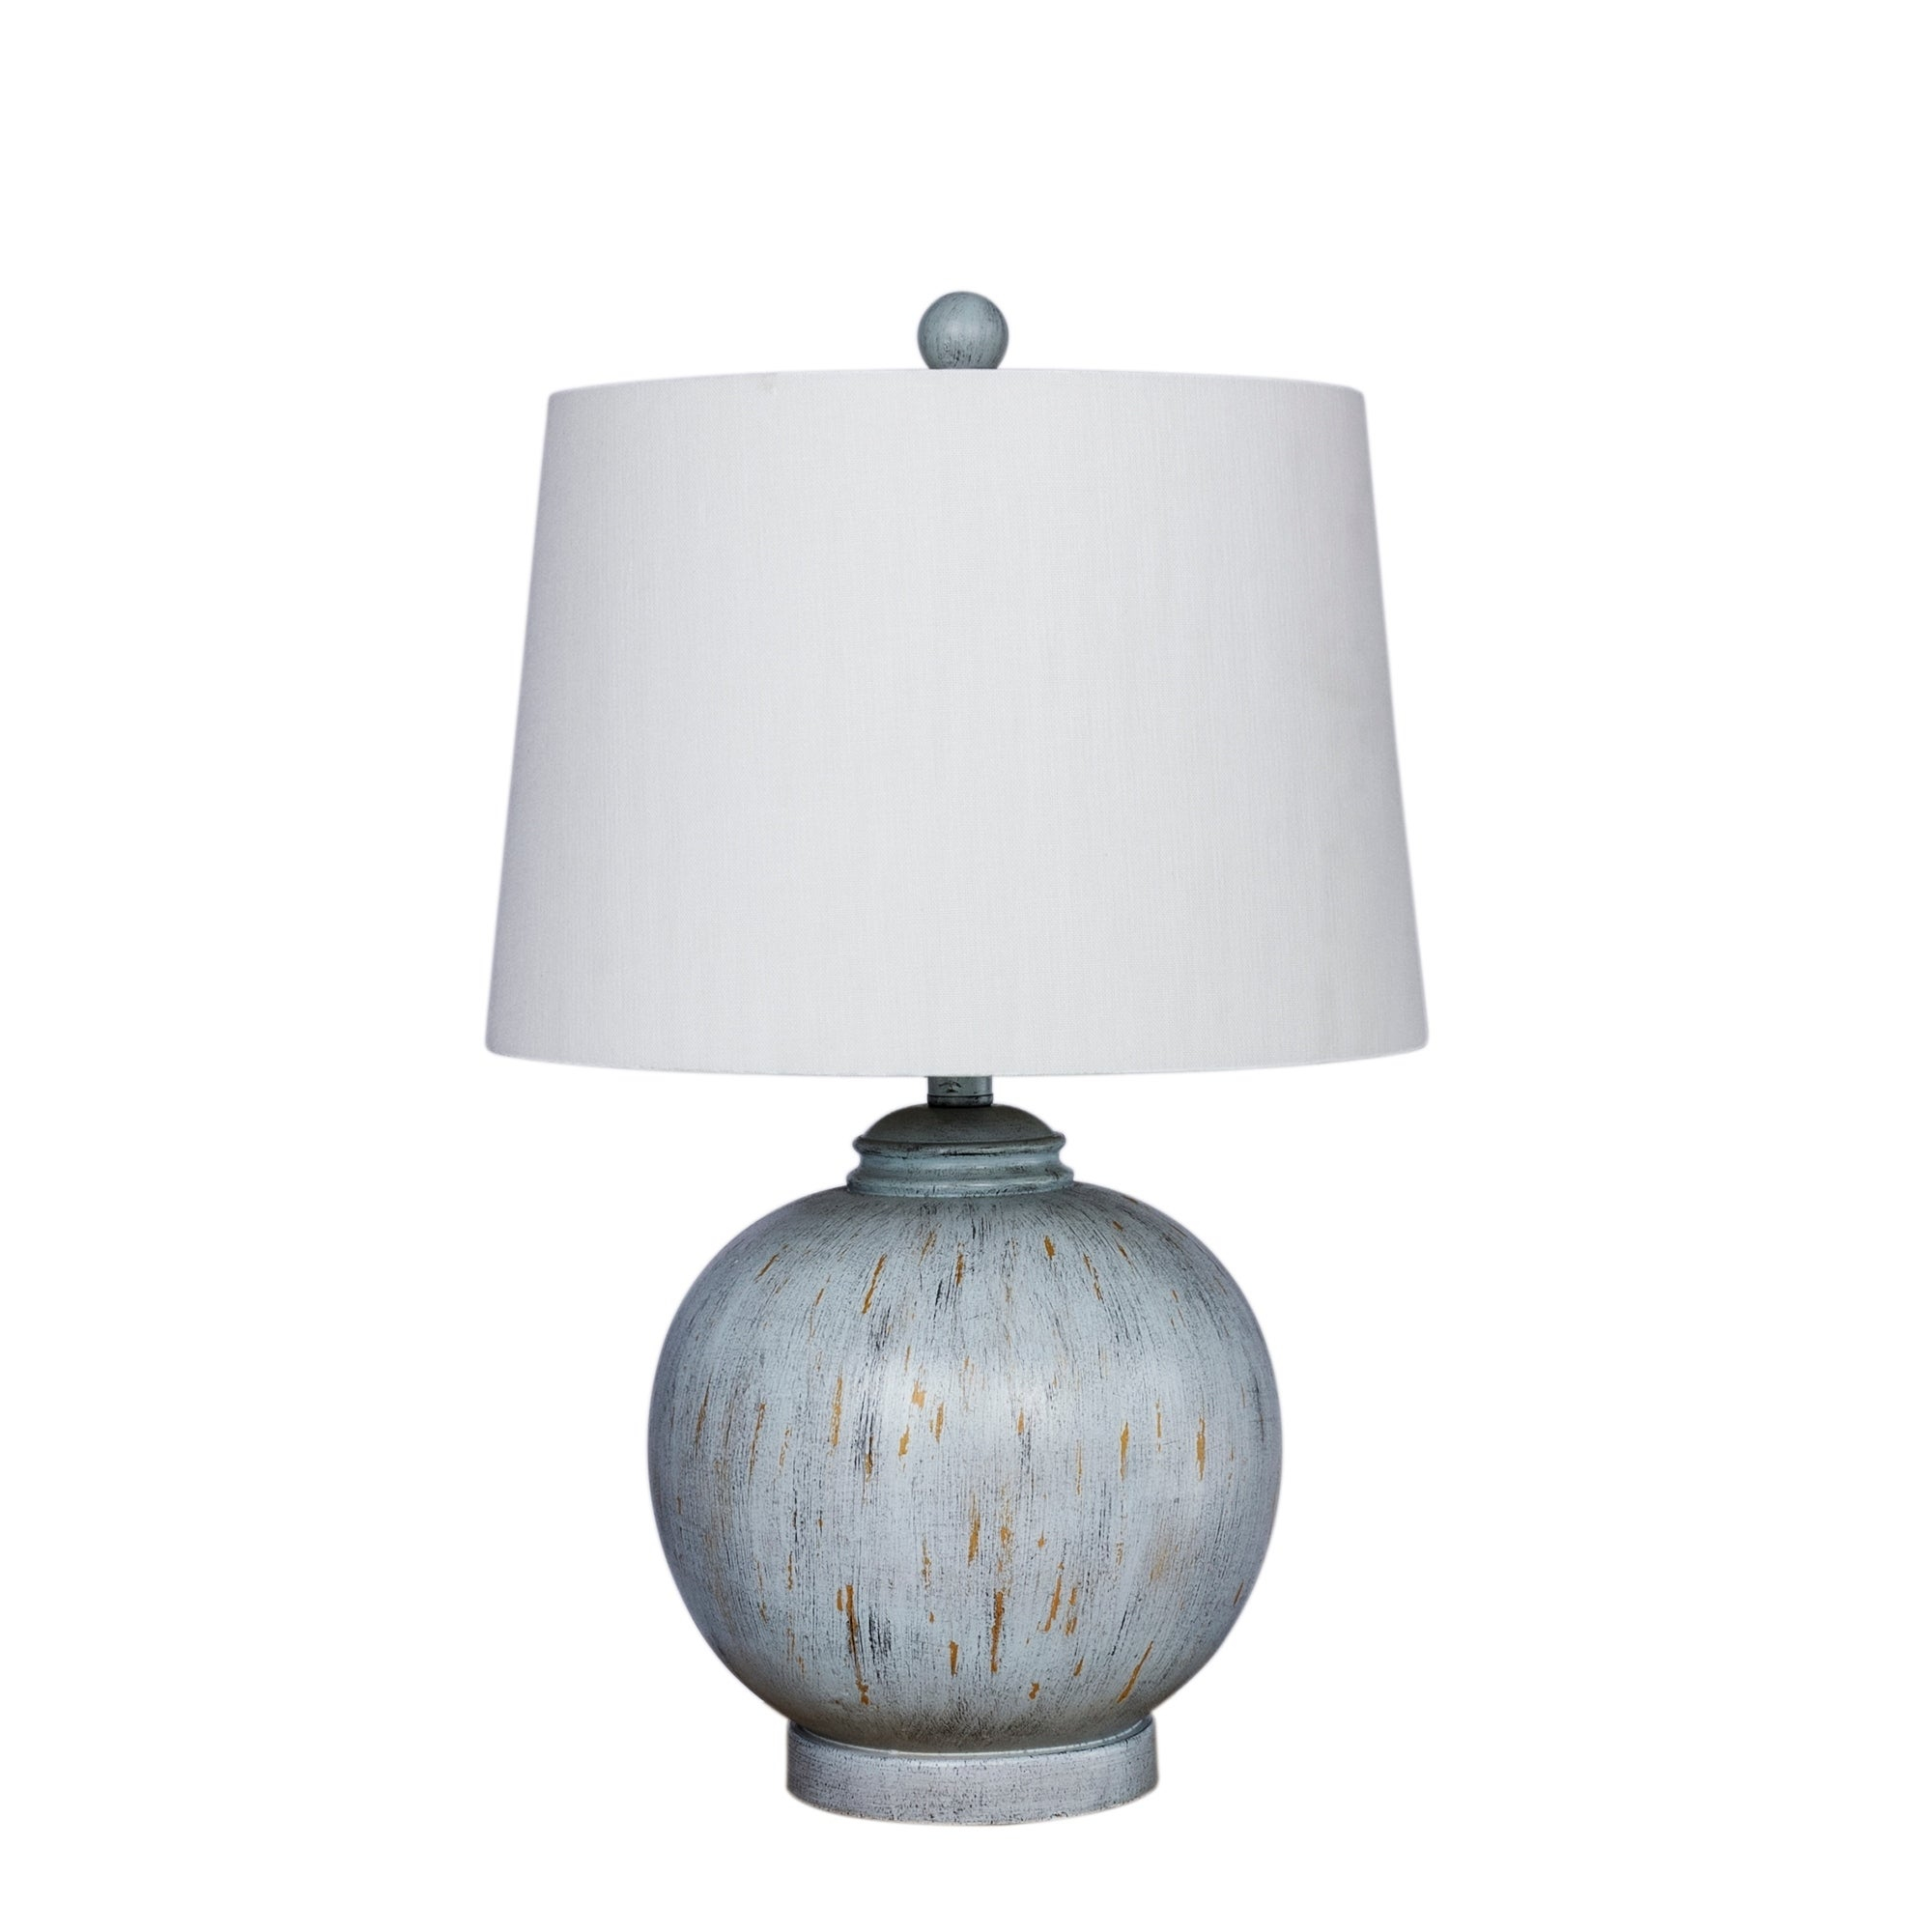 Fangio Lightings 6254blu 24in Cottage Blue Weathered Resin Table Lamp within proportions 2000 X 2000